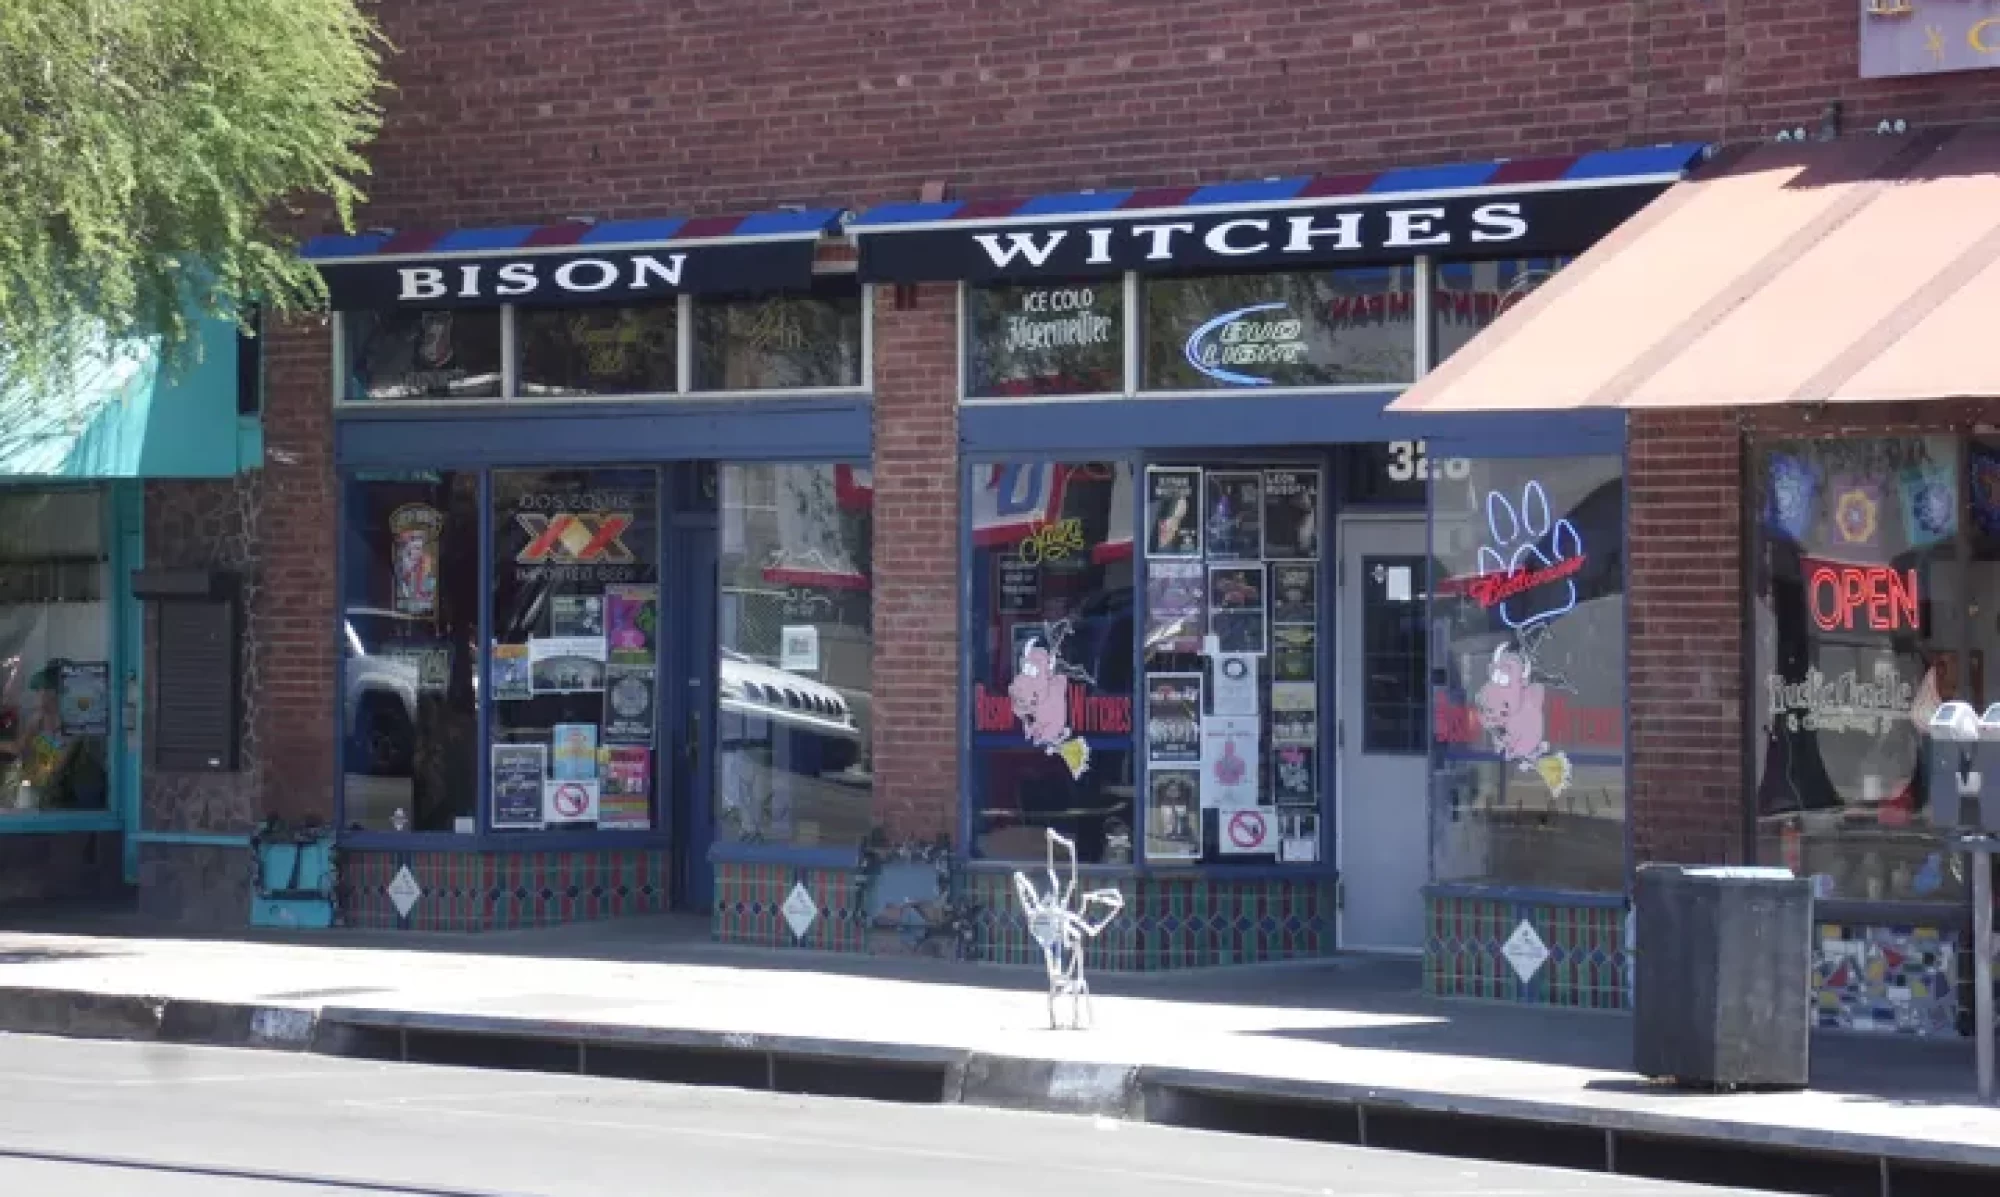 Bison Witches Bar & Deli from the street